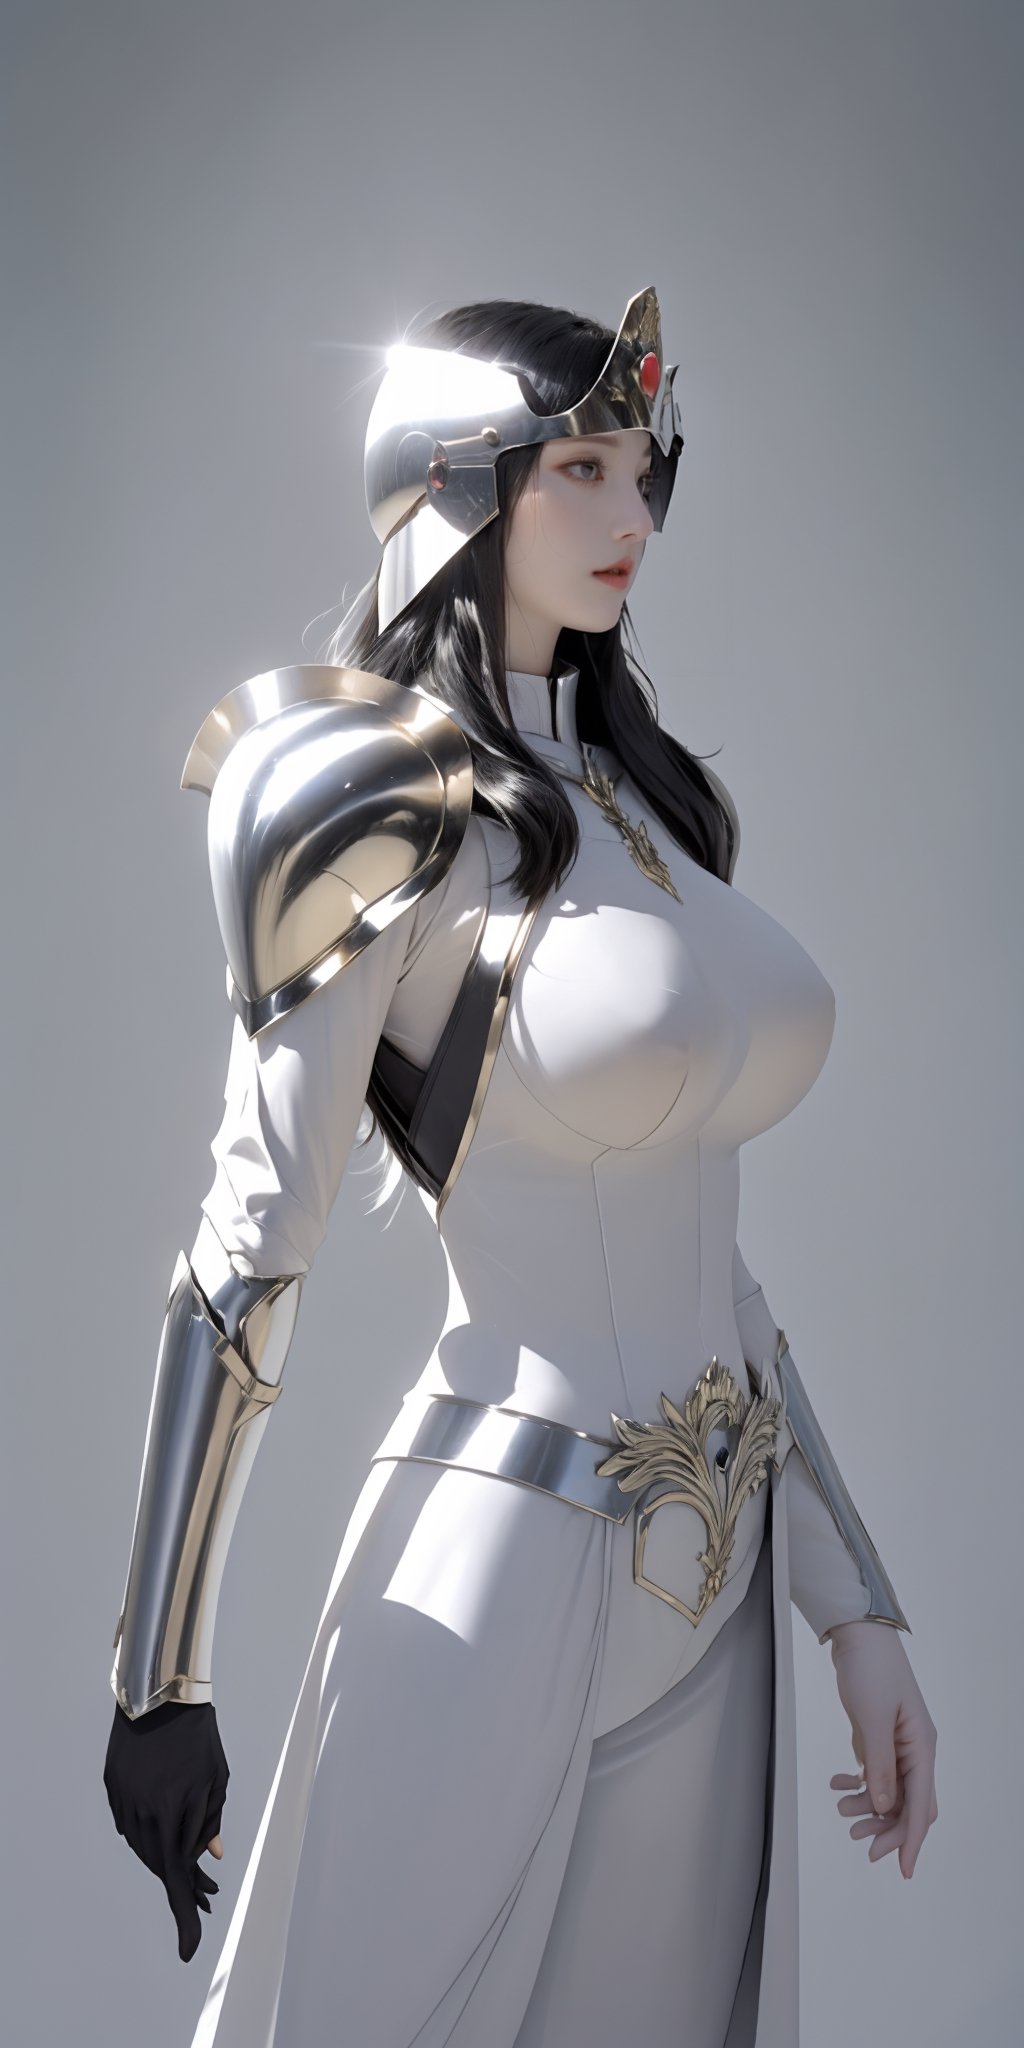 a beautiful woman, wearing armor,huge breasts,showing breasts,Saint Seiya style, holding the helmet, in her hands, white skin, short black hair, black eyes, the armor outlines her body